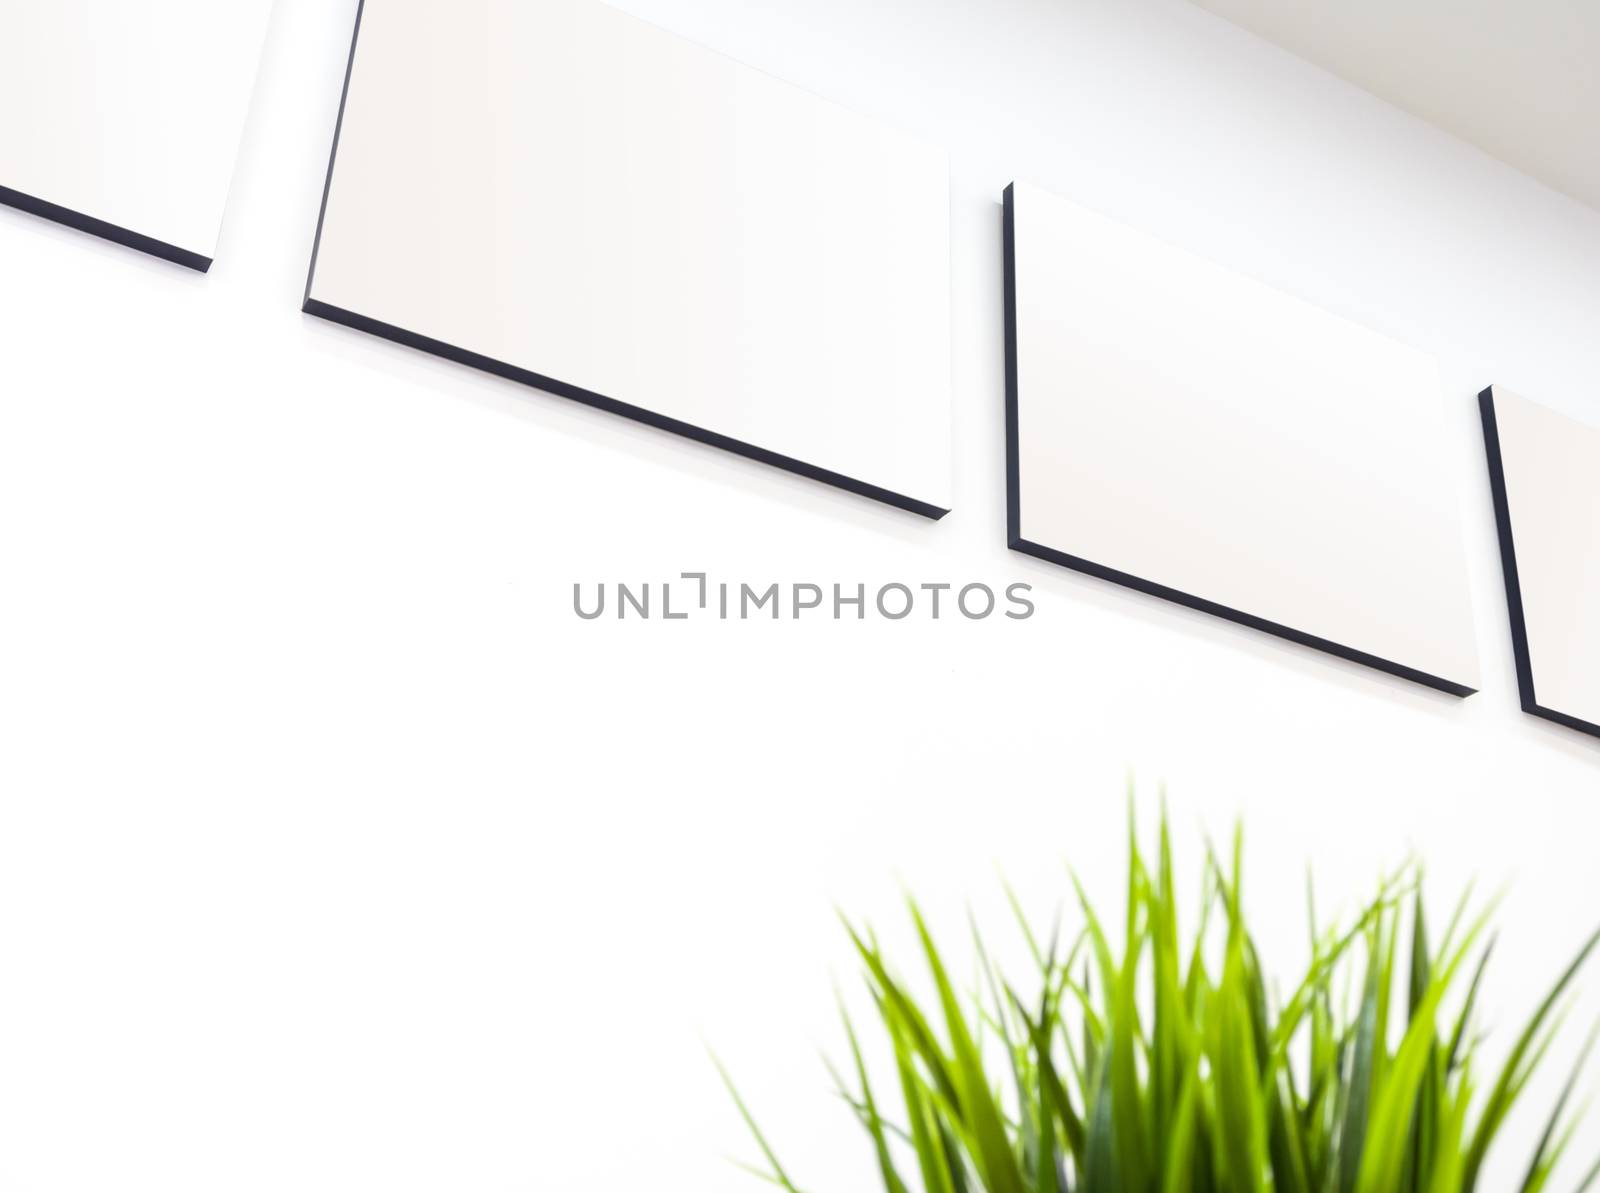 The blank canvas picture frame on the wall by Satakorn